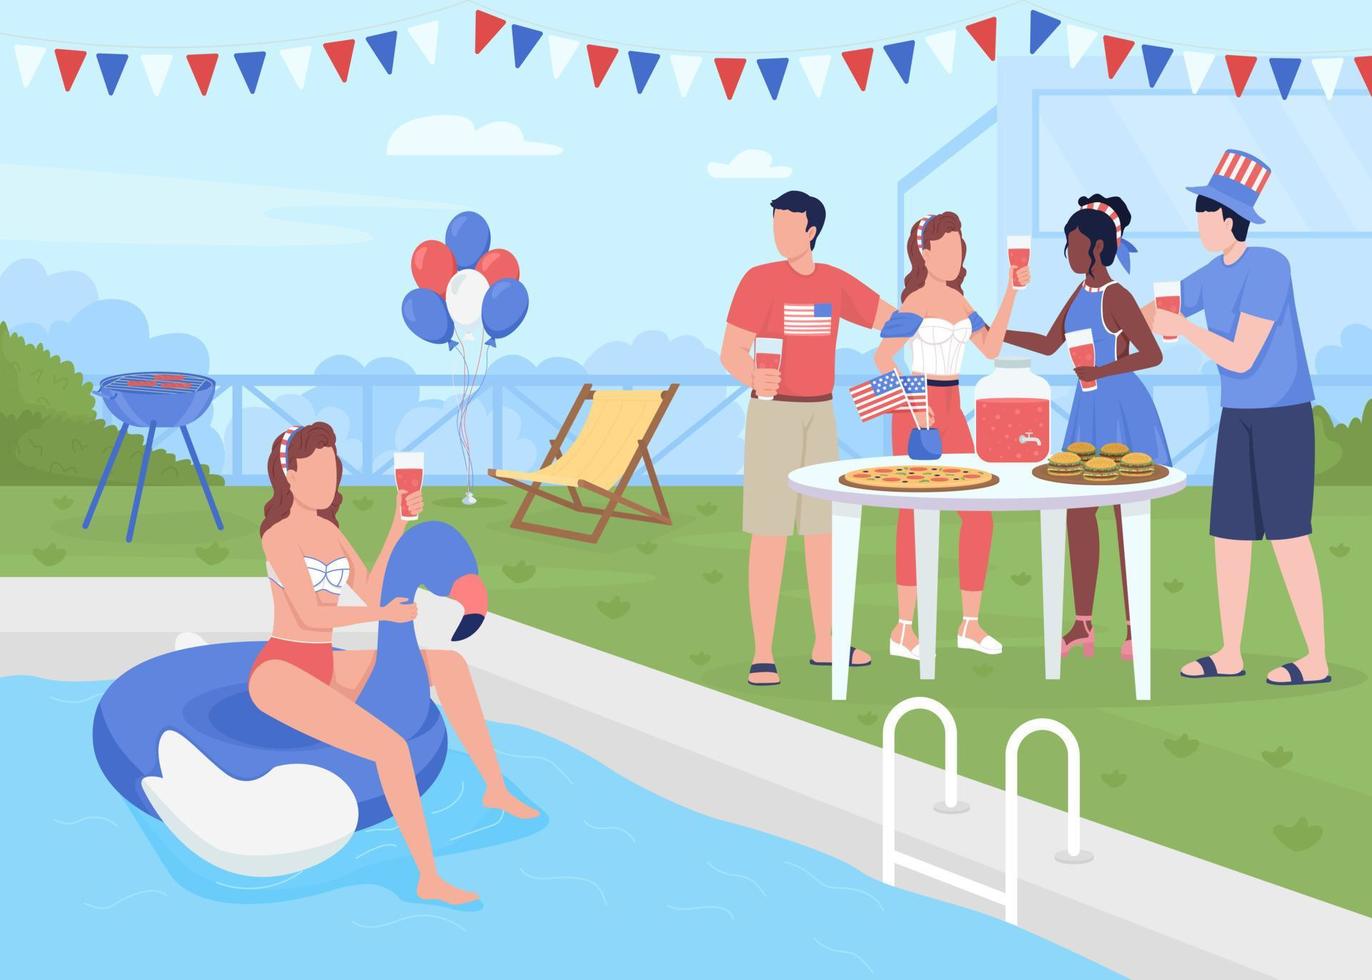 Festive party for Independence day at courtyard flat color vector illustration